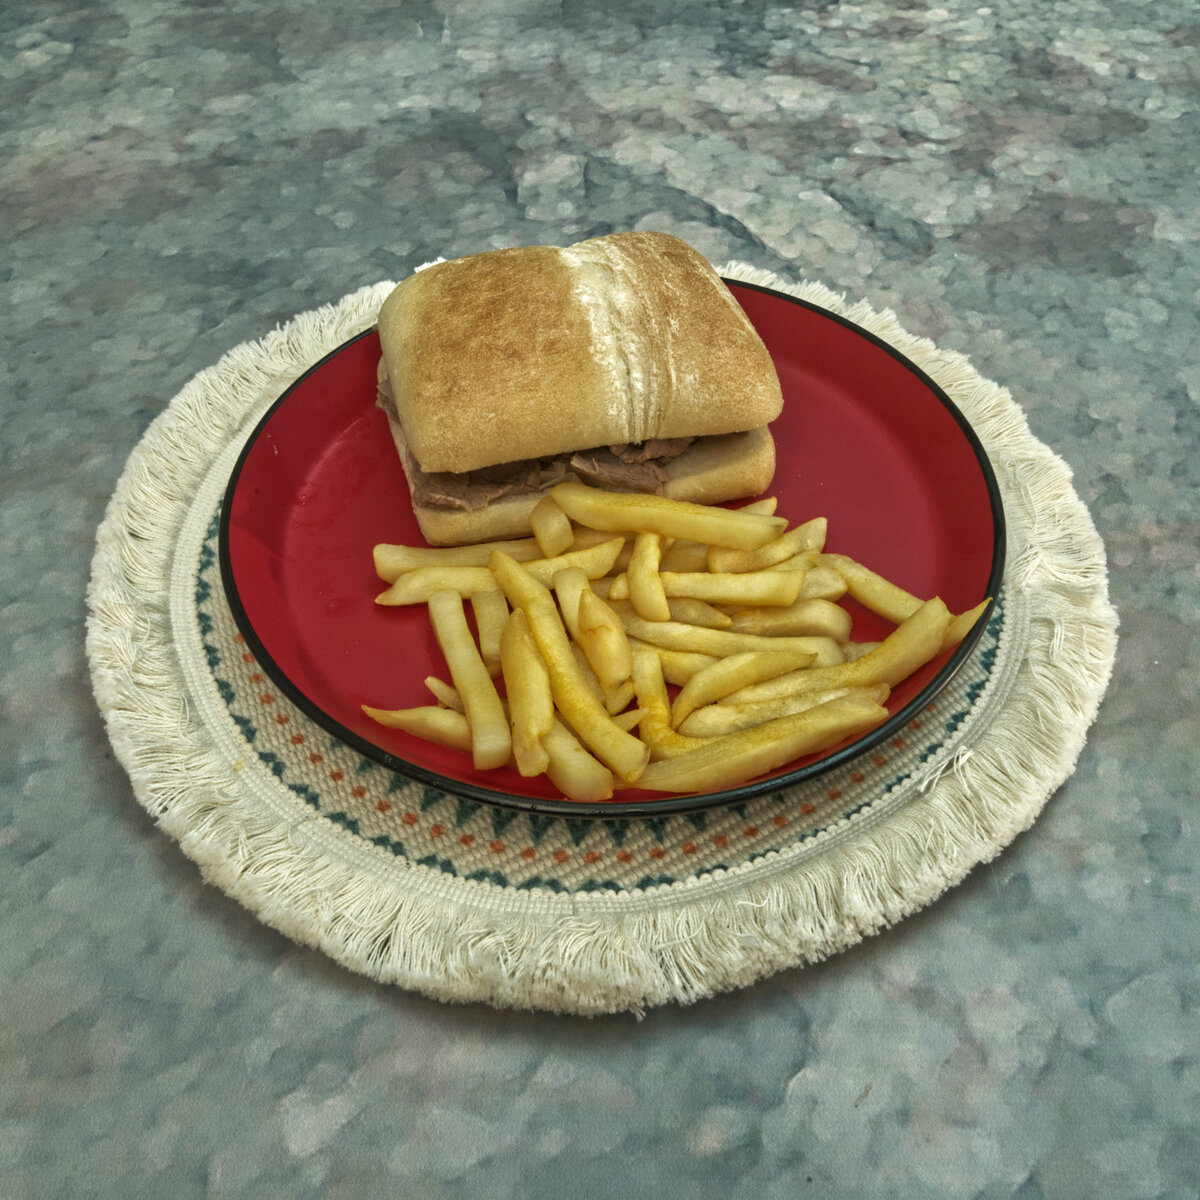 Roast Beef Au Jus Sandwich with French Fries